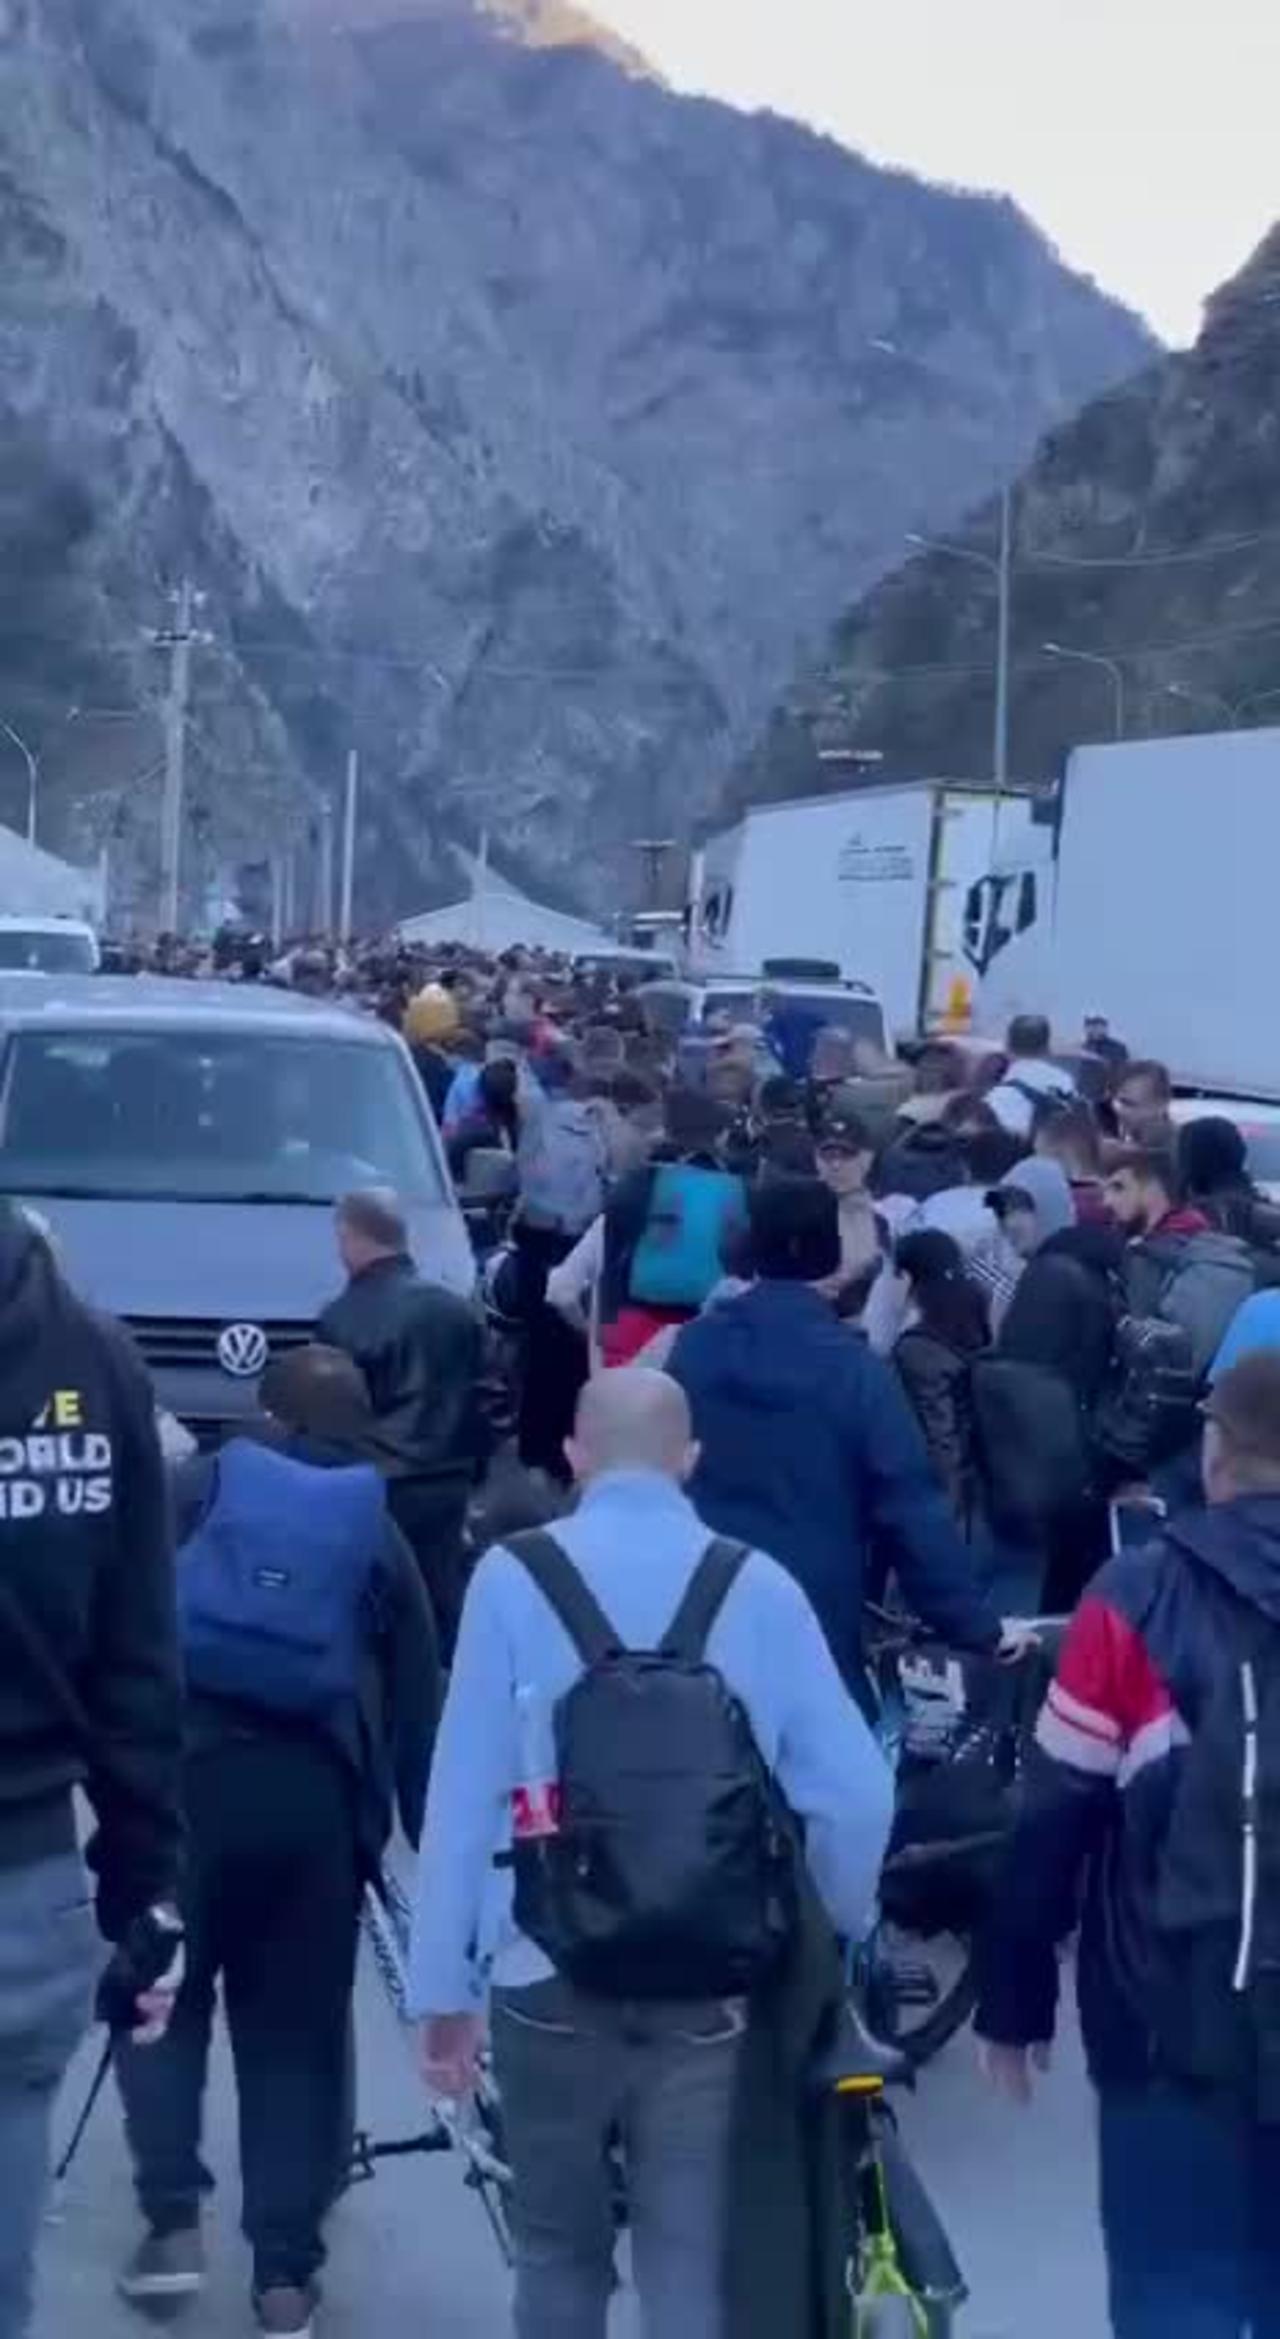 Russians trying to leave for Georgia were allowed to cross the border on foot.